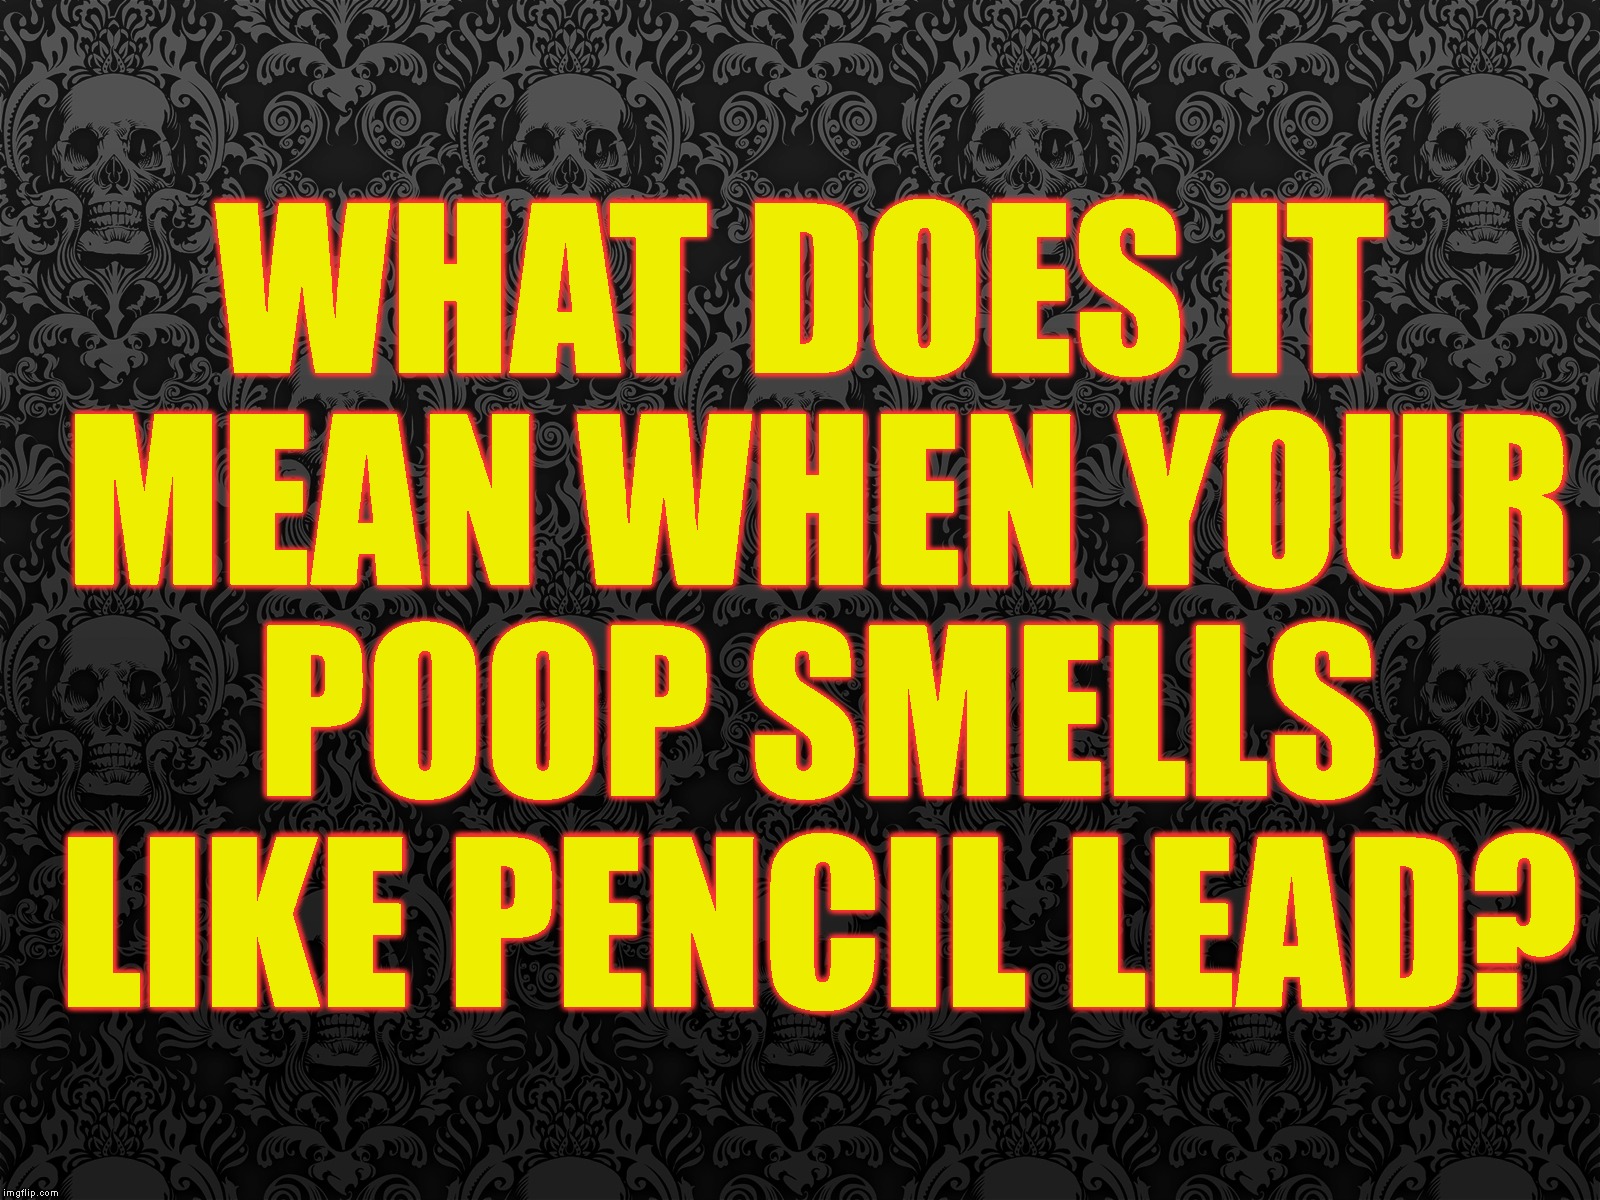 Well, That Was Unexpected | WHAT DOES IT MEAN WHEN YOUR POOP SMELLS LIKE PENCIL LEAD? | image tagged in just wondering,questions,help,who knows,wtf,what | made w/ Imgflip meme maker